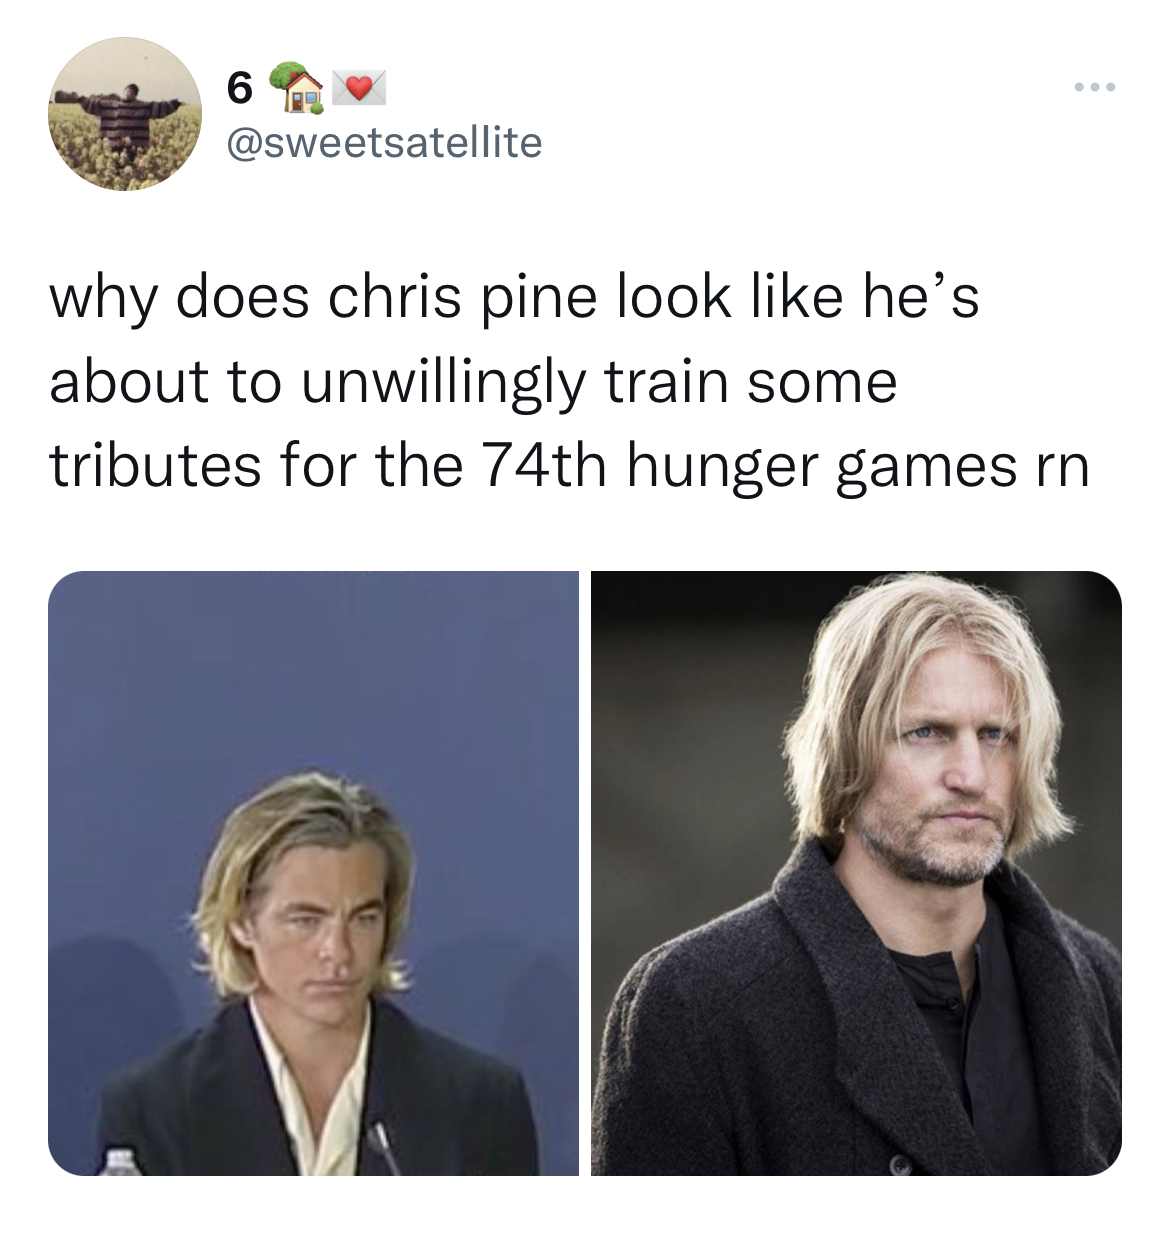 Chris Pine Venice Film Festival Memes - human behavior - 6 www. why does chris pine look he's about to unwillingly train some tributes for the 74th hunger games rn